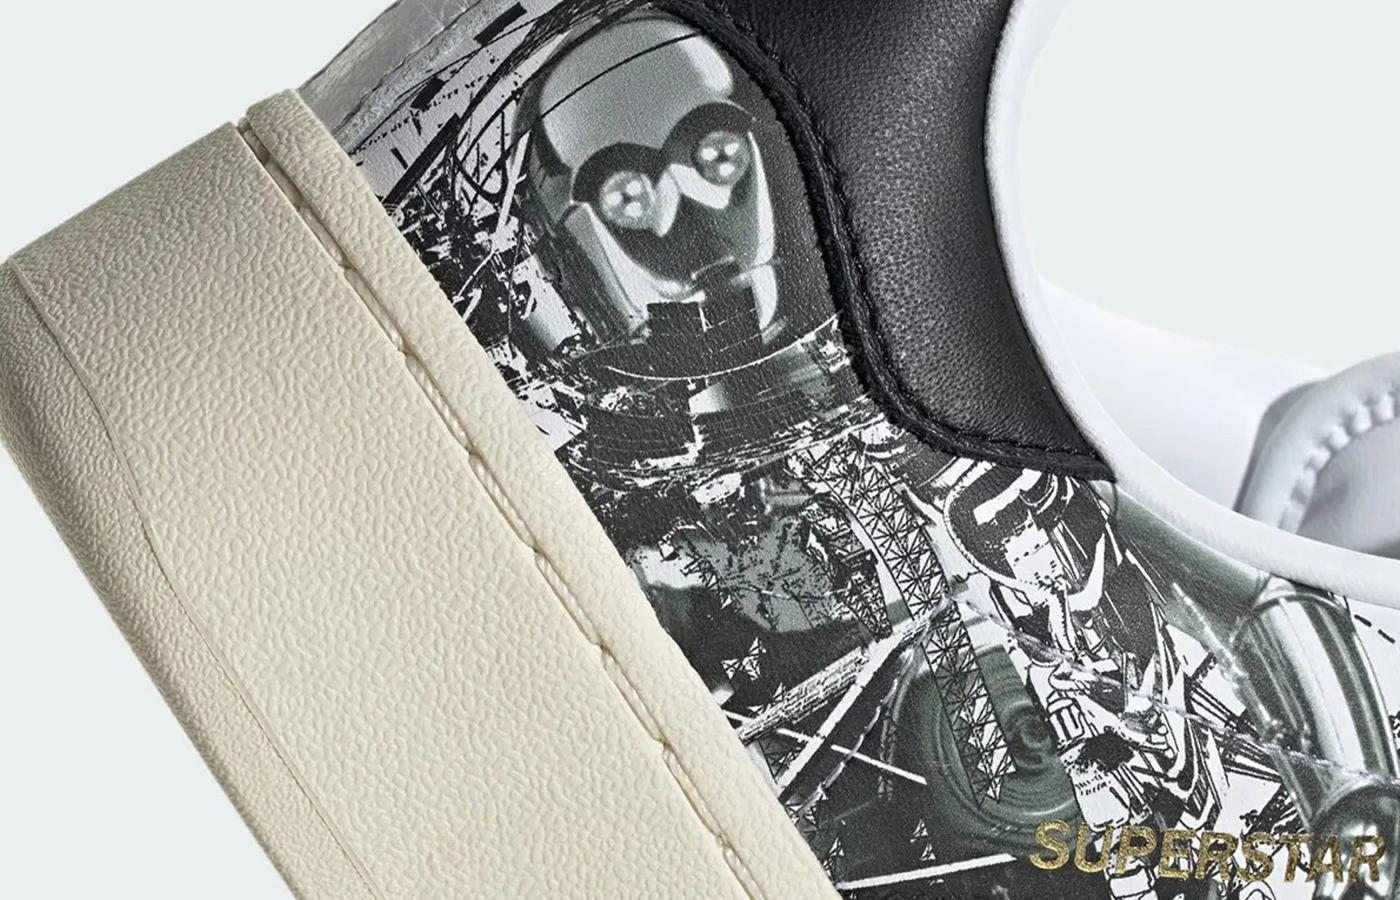 May 4th, the Star Wars x NANZUKA x adidas Superstar XLG Will Be With You